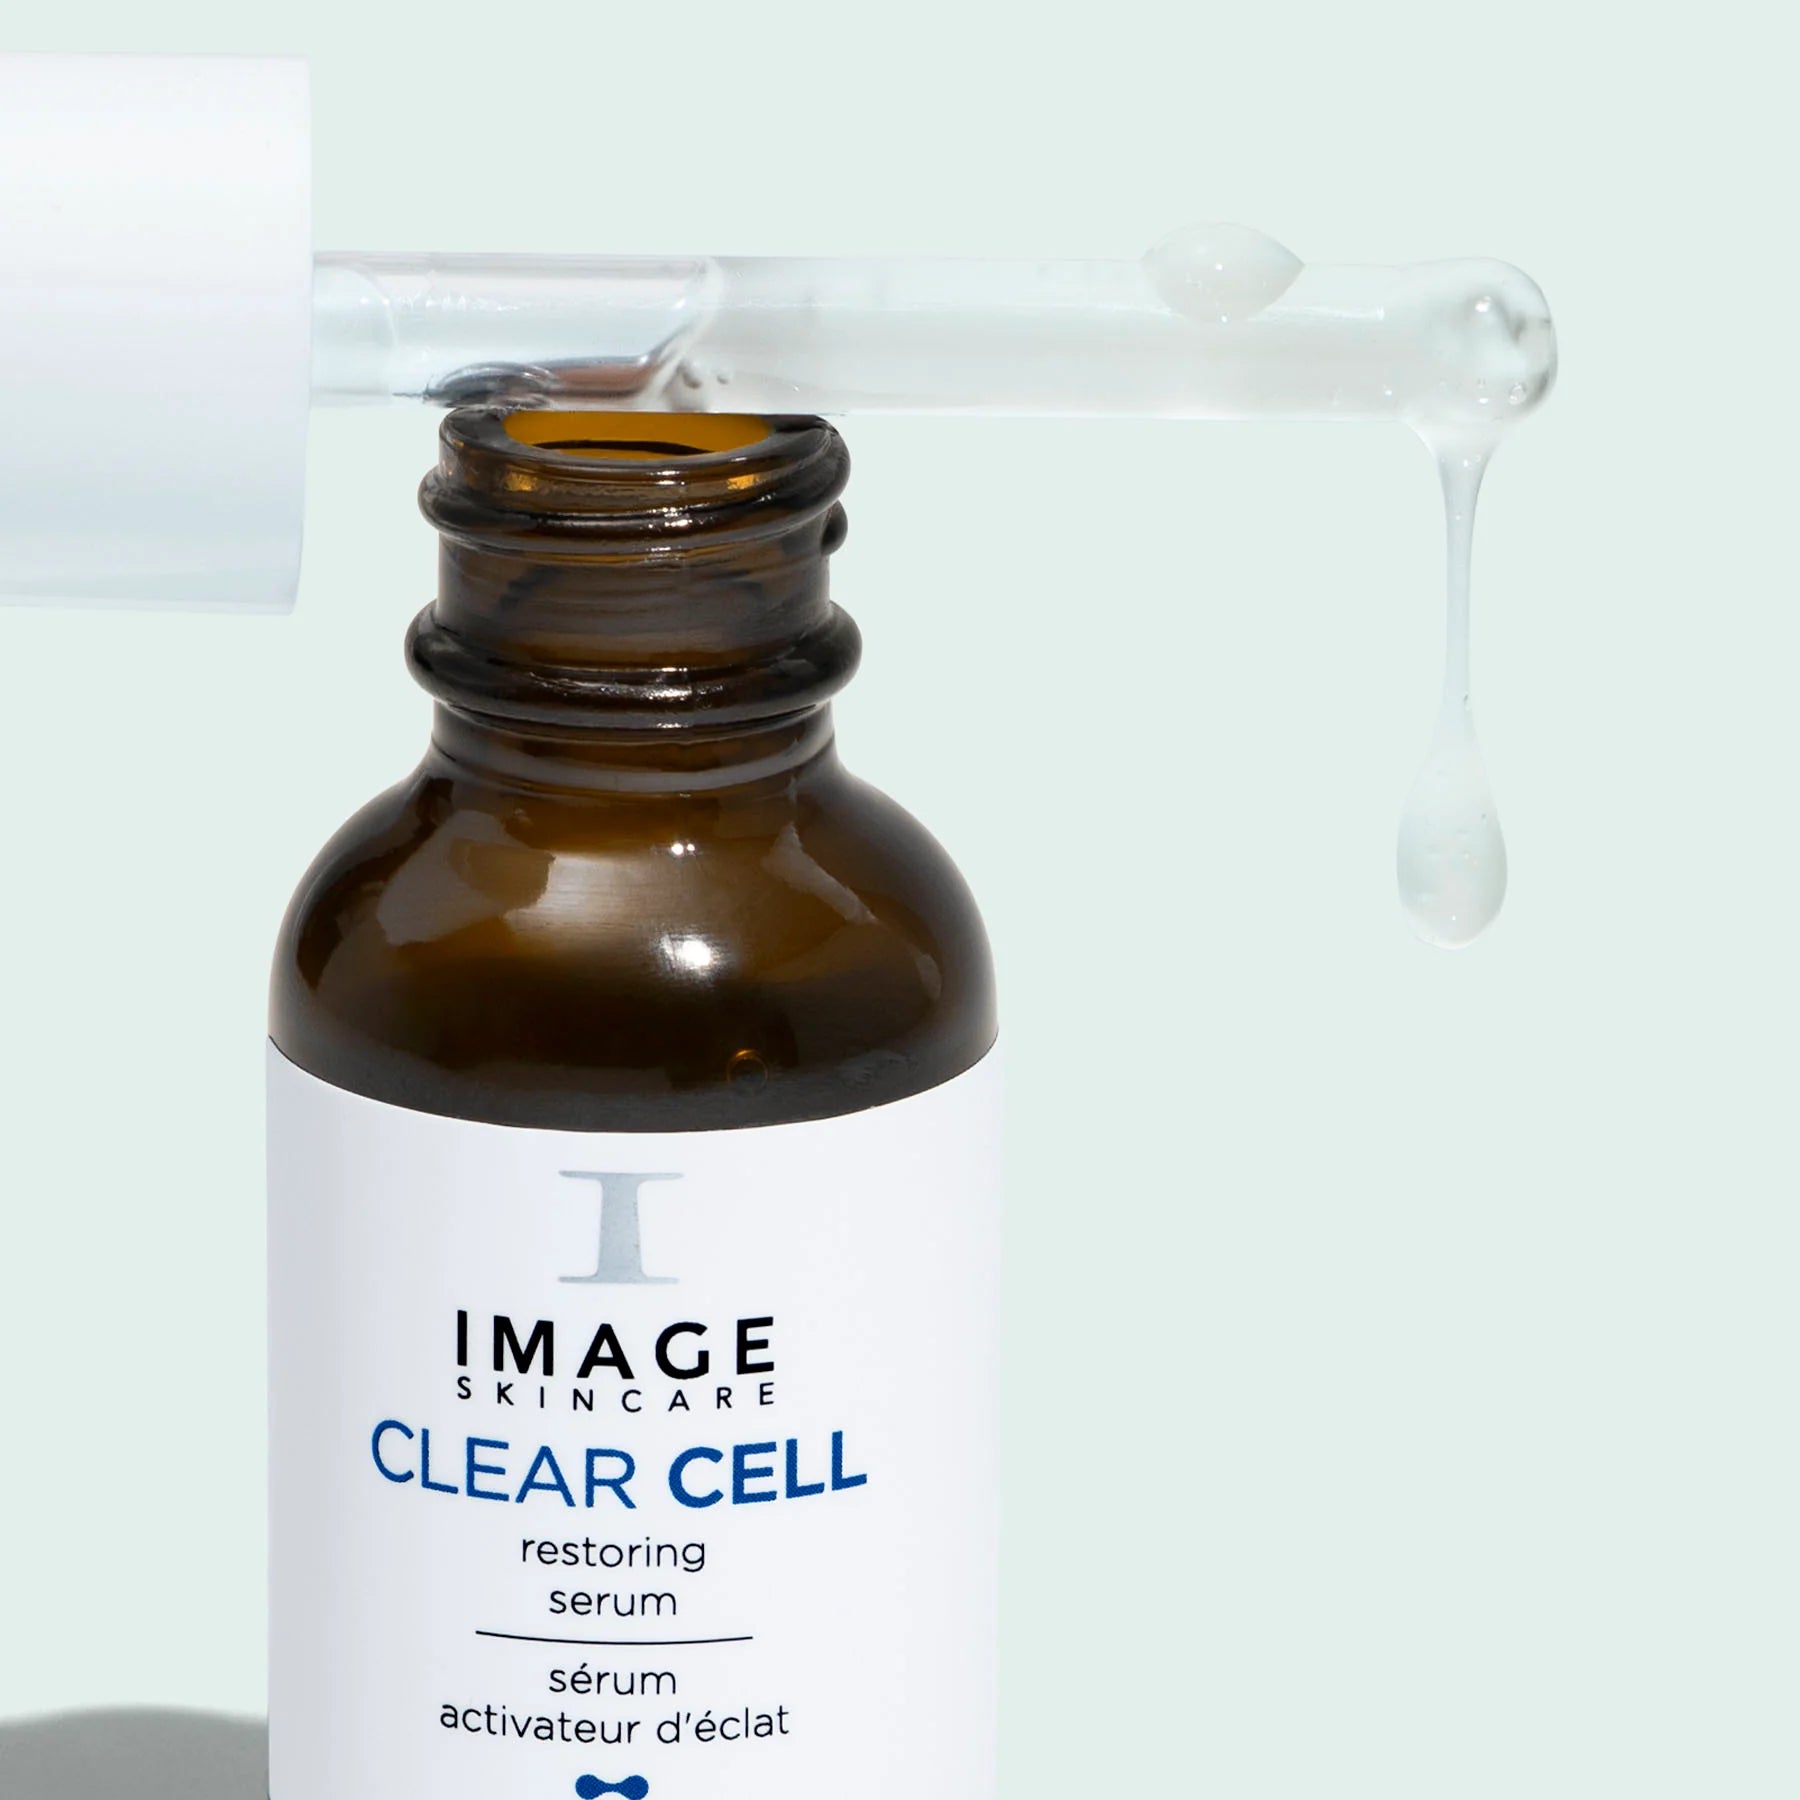 Image Skincare Clear Cell